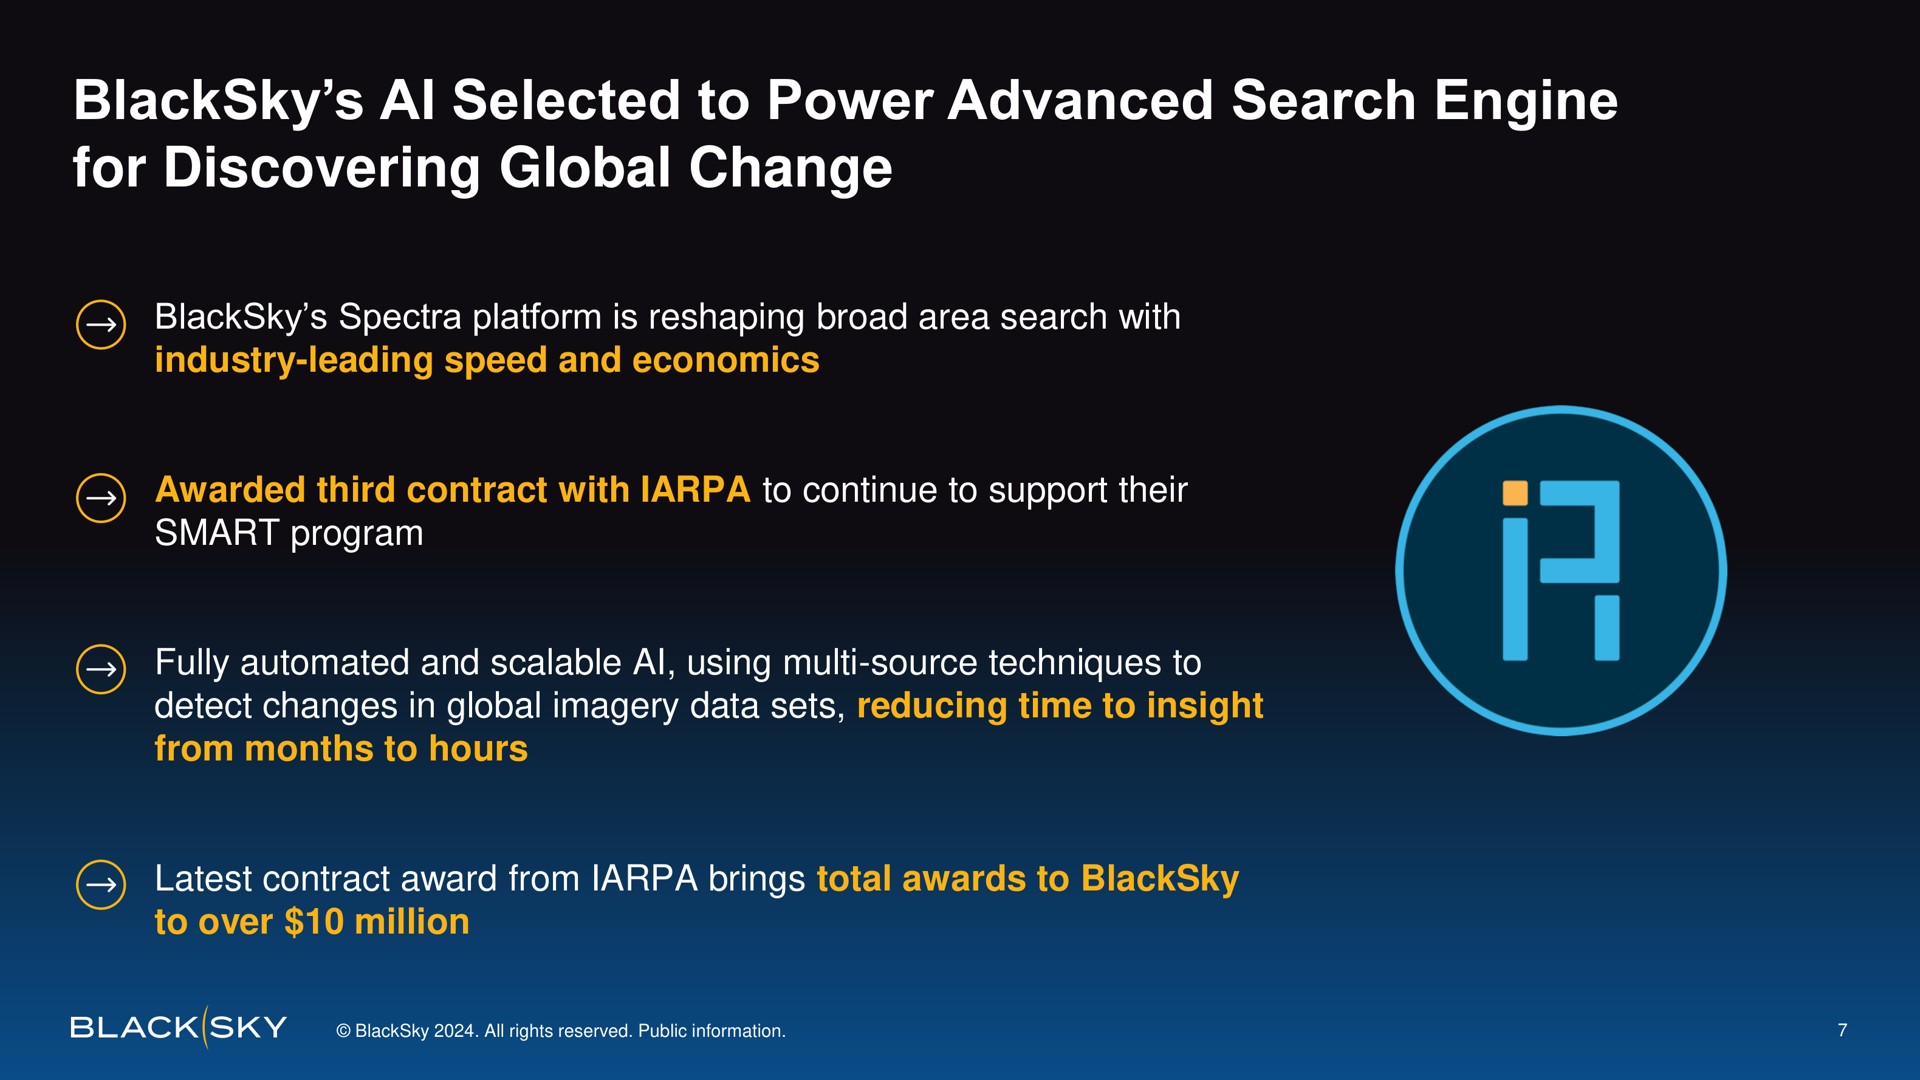 selected to power advanced search engine for discovering global change | BlackSky